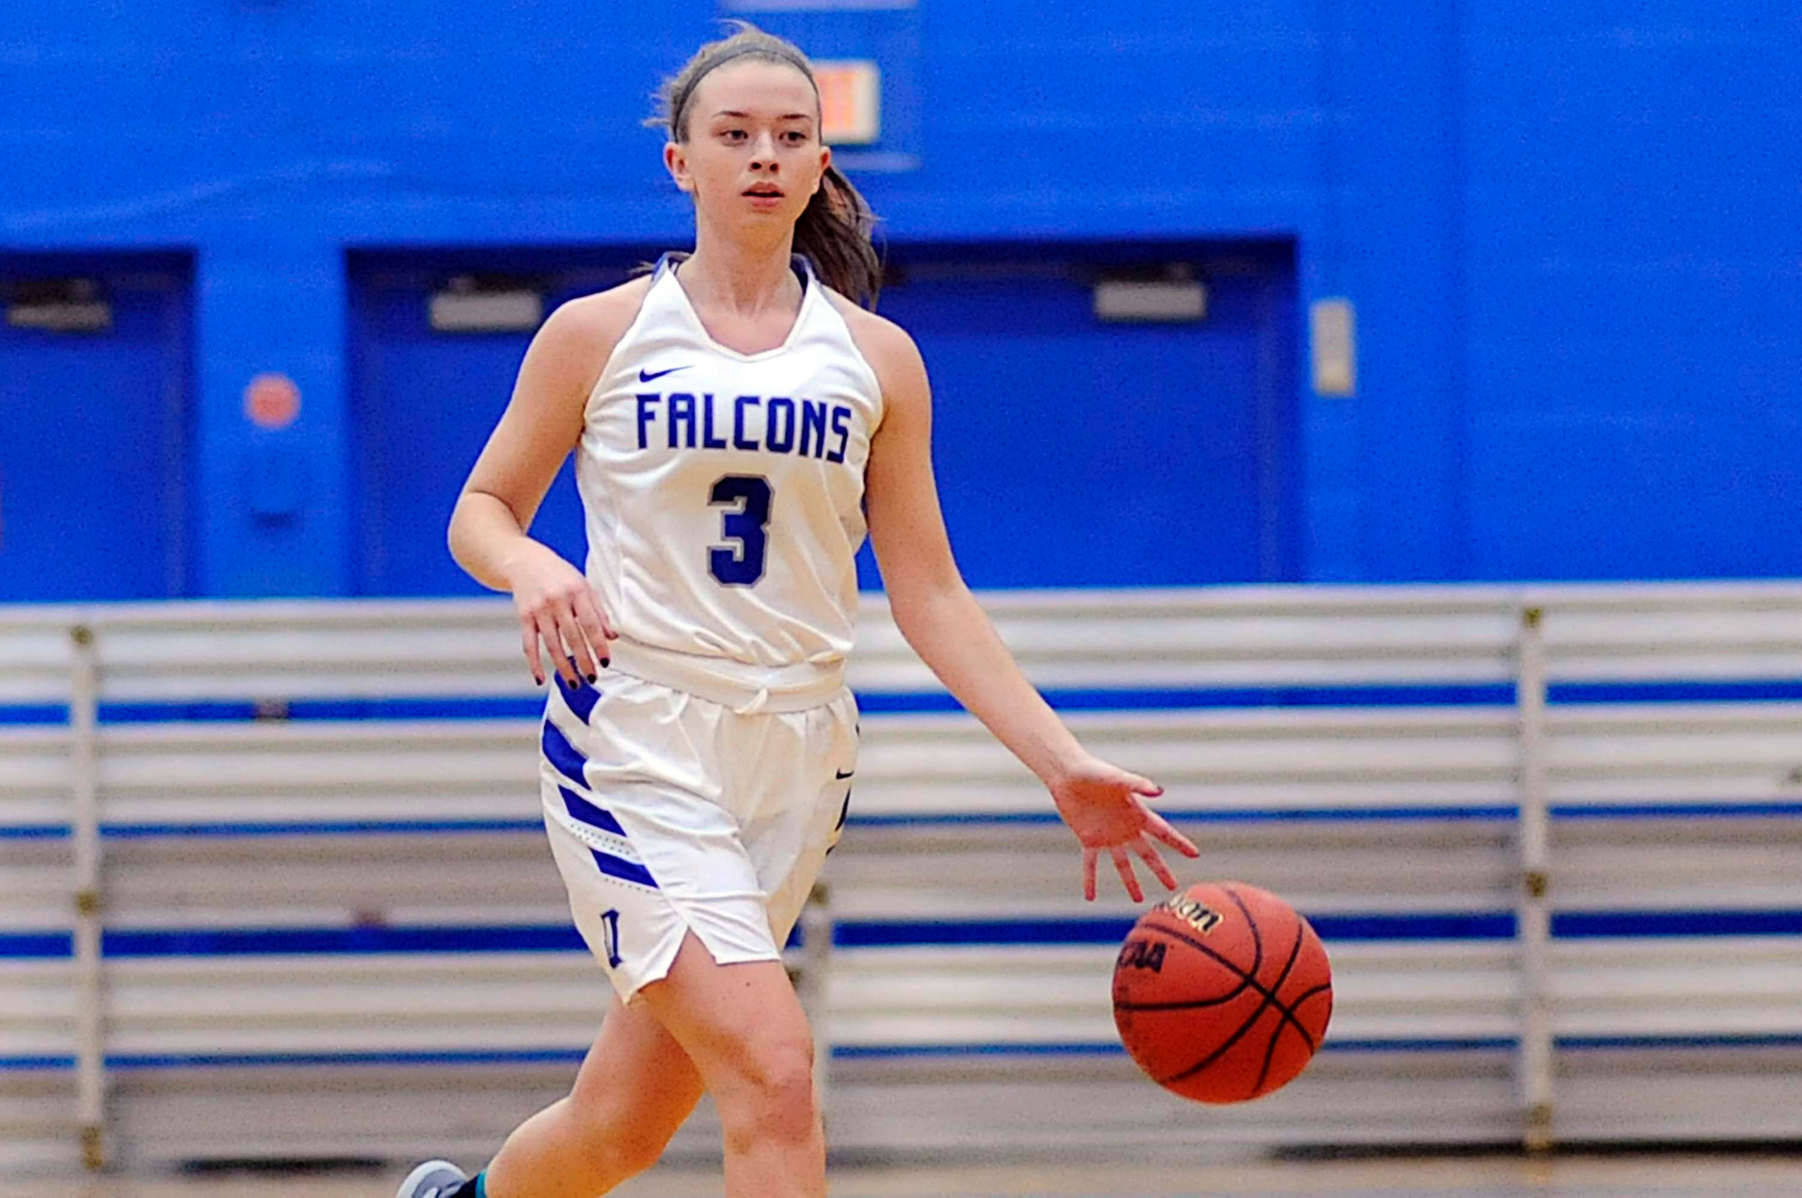 Women's Basketball Upended by Suffolk University, 63-56